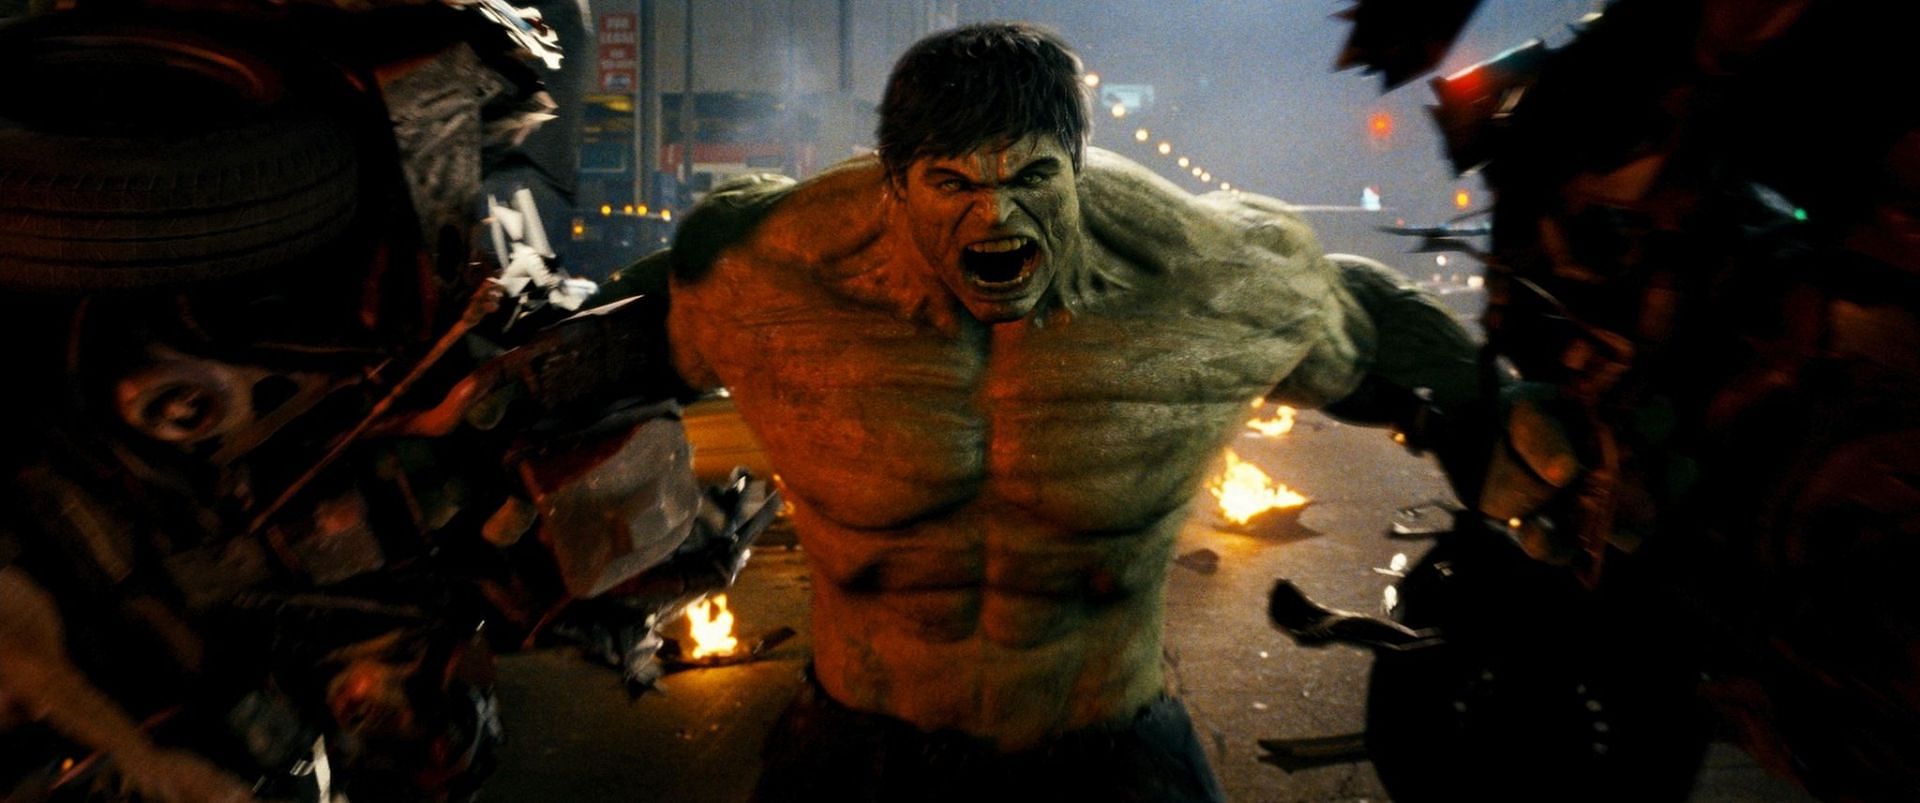 Edward Norton stars as the Hulk in this underwhelming Marvel movie that failed to capture audiences (Image via Universal)